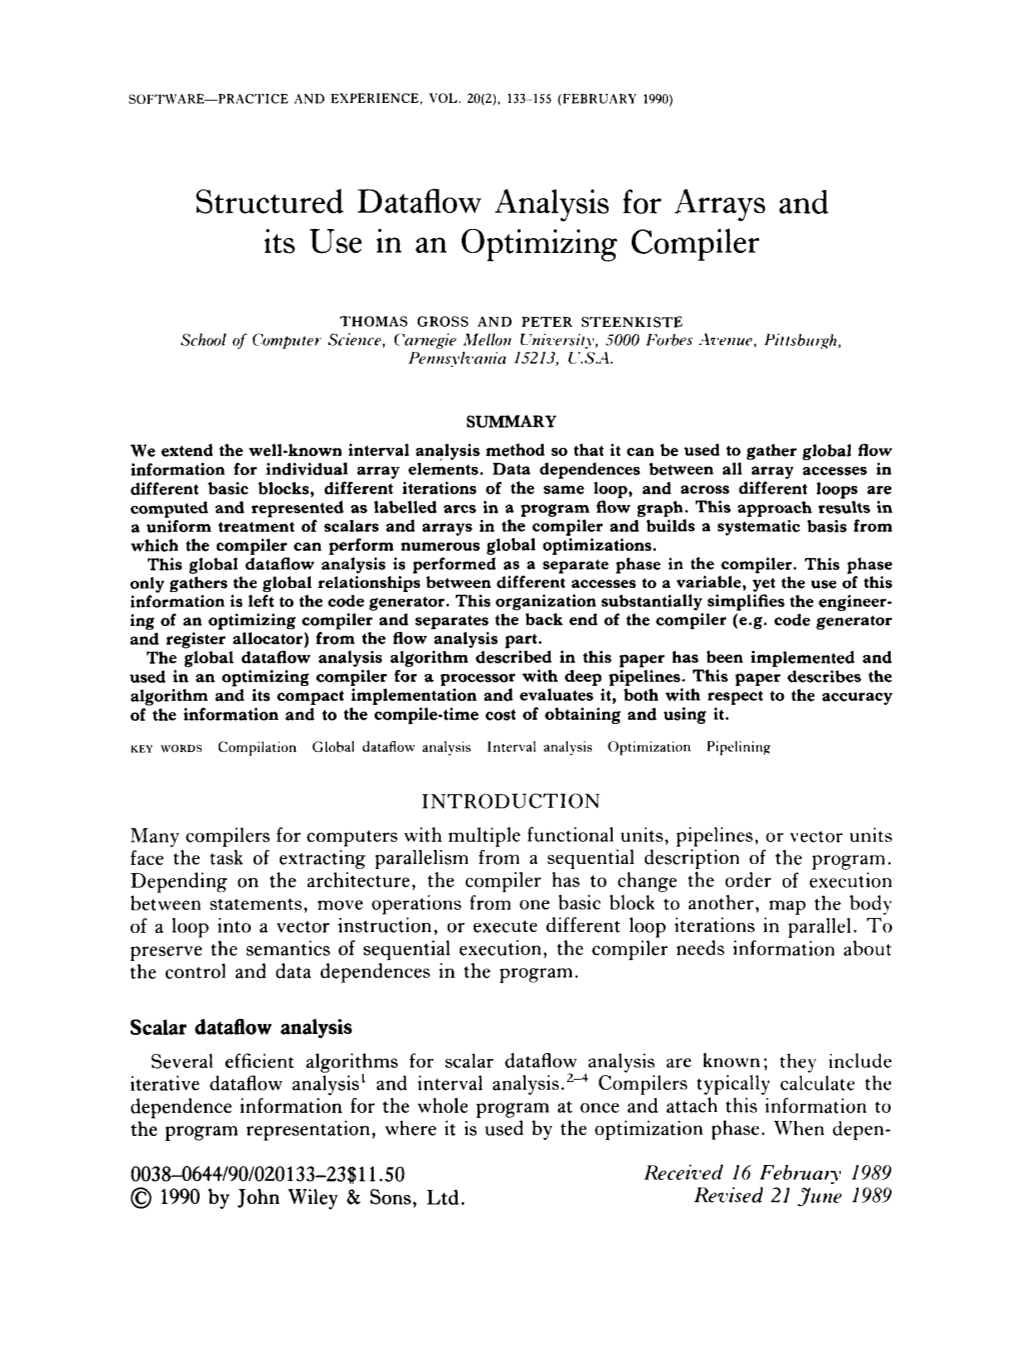 Structured Dataflow Analysis for Arrays and Its Use in an Optimizing Compiler